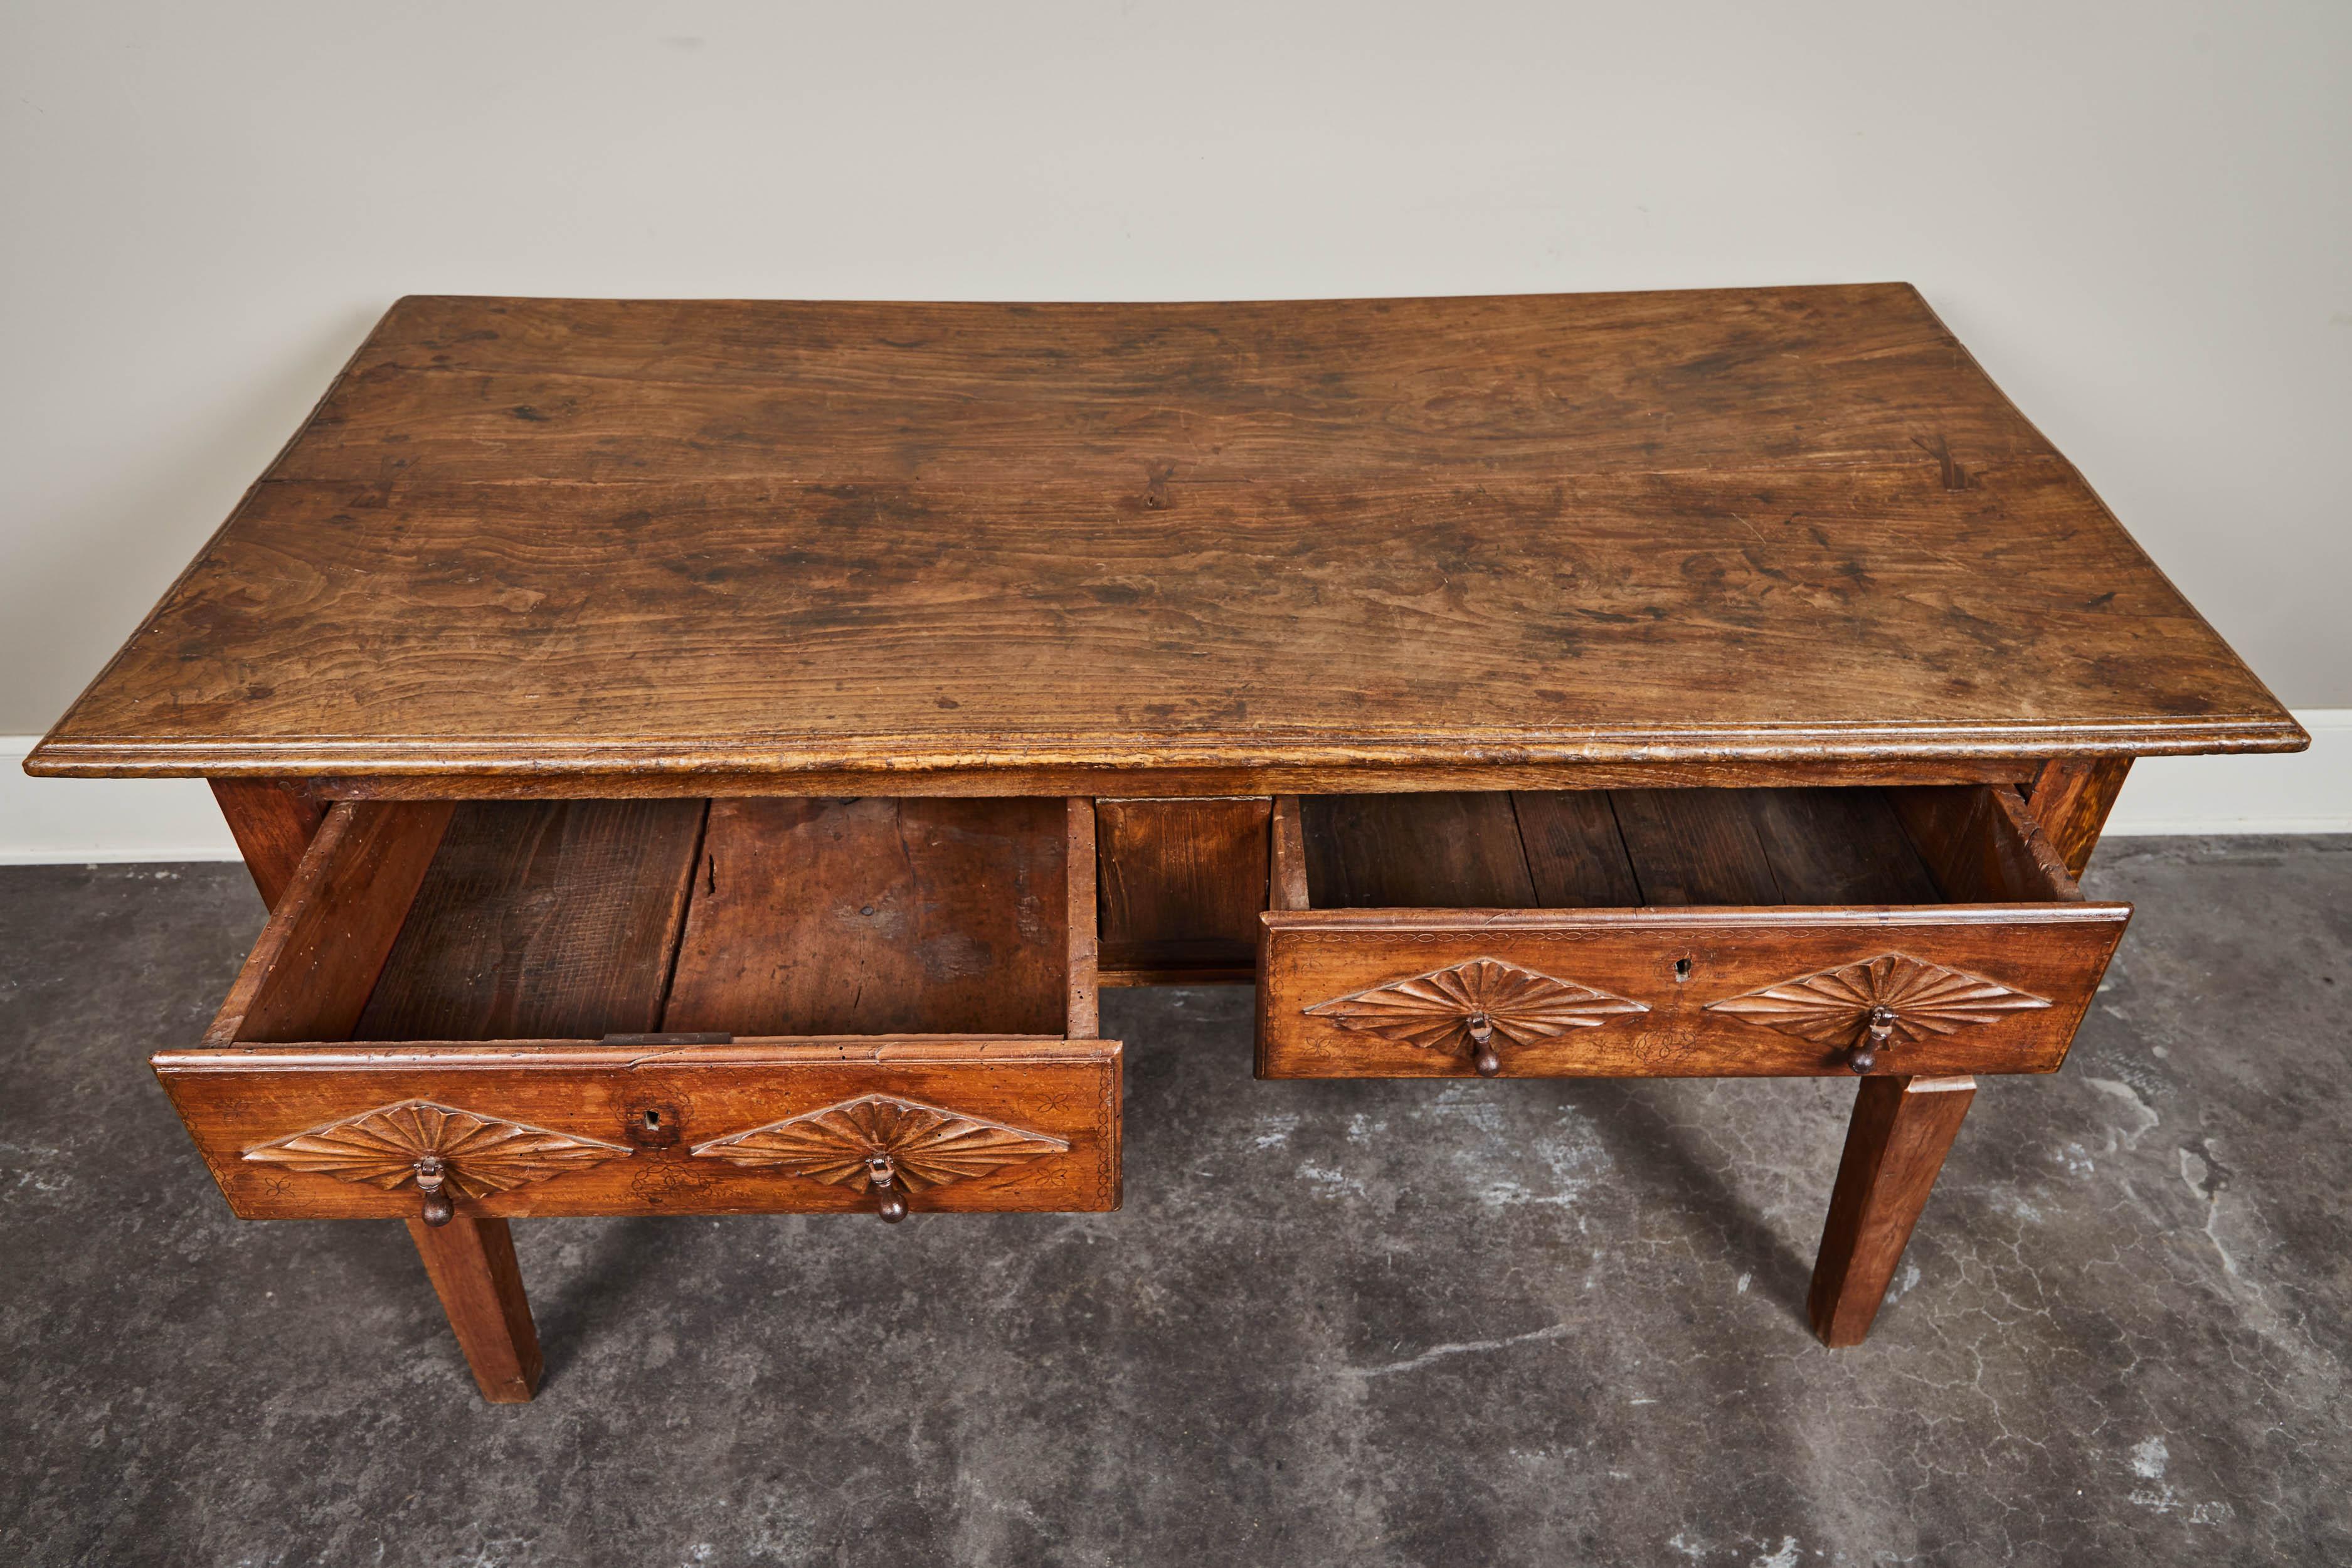 18th Century Portuguese 2-Drawer Table (Colonial Revival)